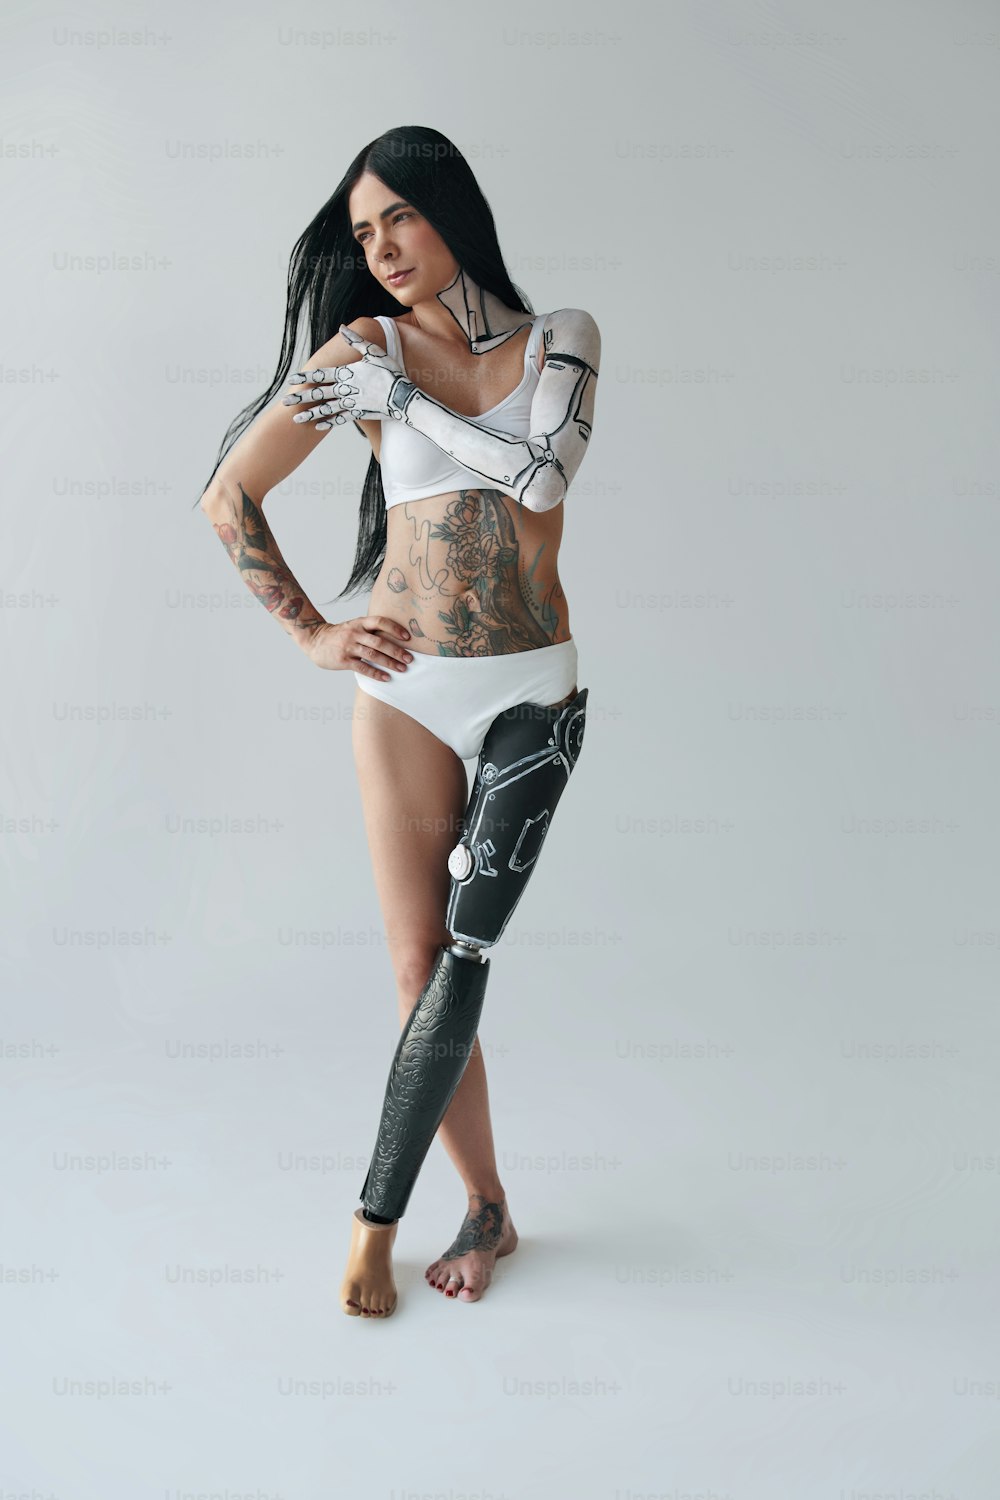 Premium Photo  Beautiful girl with a prosthetic leg posing on the